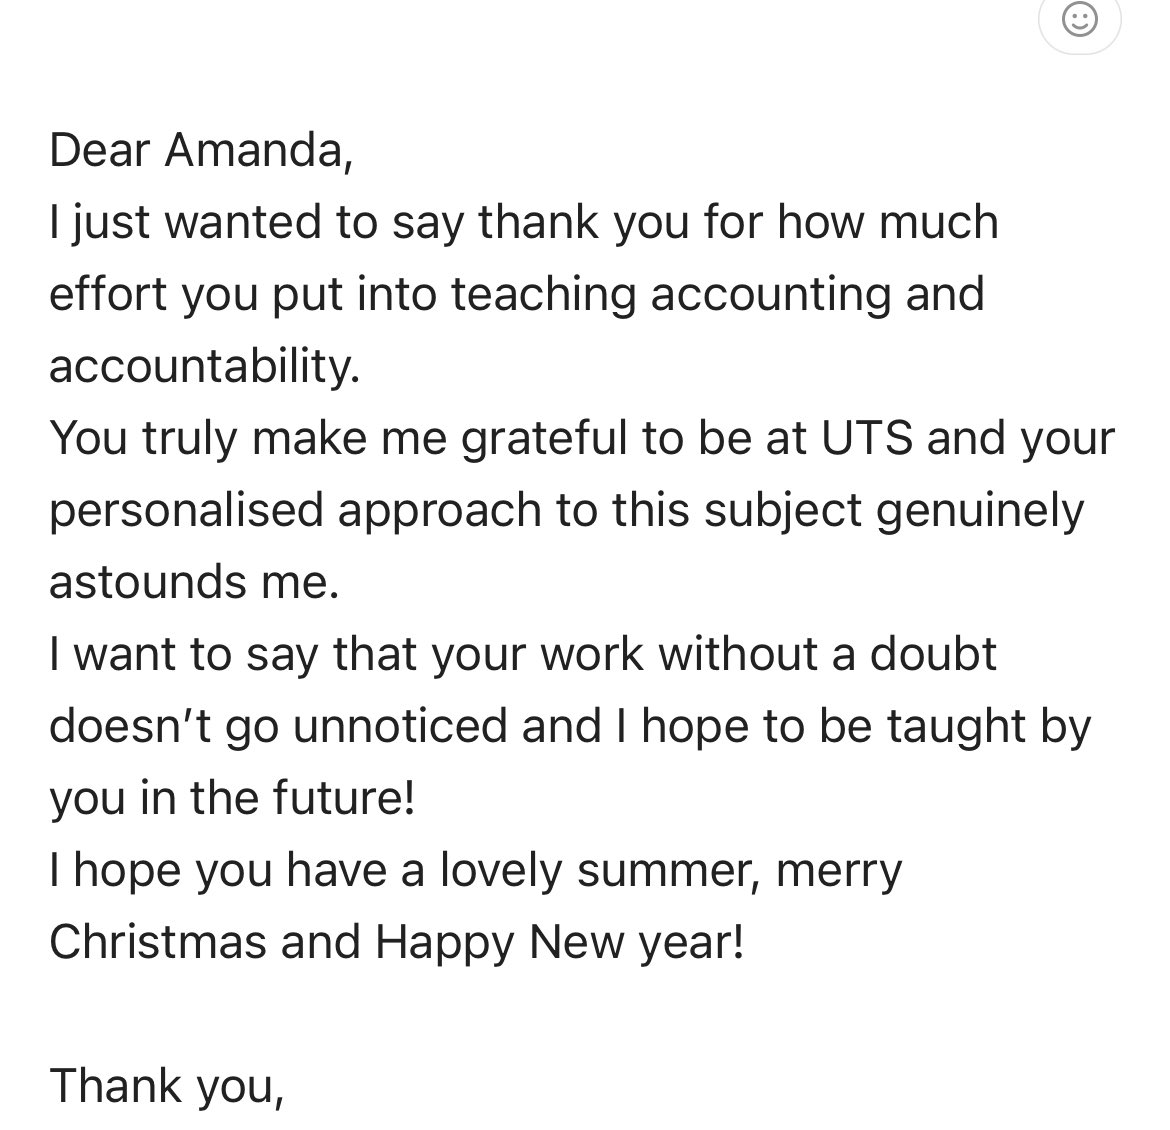 As I grind out the last 2.5 working days of the year - emails like this one remind me why I do this - why our work with students matters so much ❤️ and why I’m proud to be at @UTSEngage @UTS_Business